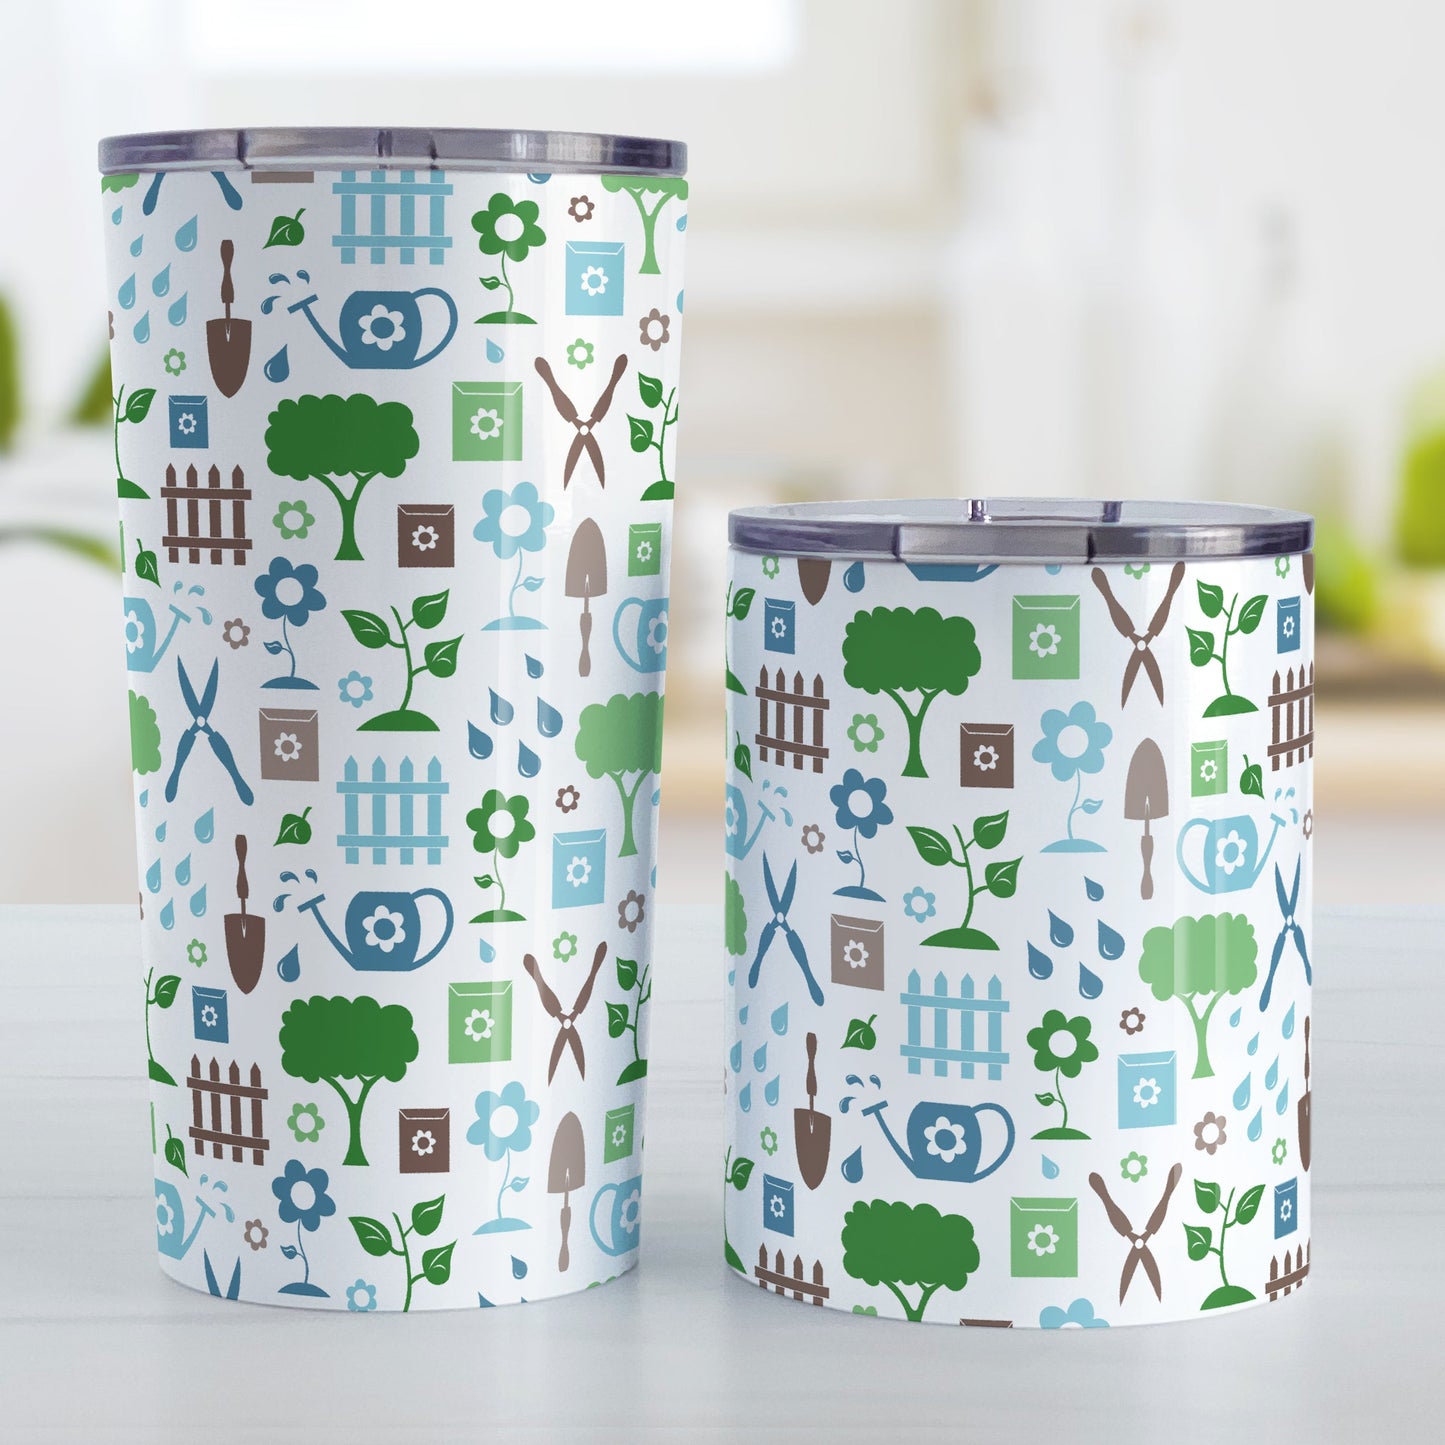 Gardening Pattern Tumbler Cup (20oz and 10oz) at Amy's Coffee Mugs. Stainless steel insulated tumbler cups designed with a gardening pattern with trees, plants, flowers, seed packets, watering cans, fences, and gardening tools in blue, green, and brown. Photo shows both sized cups next to each other.